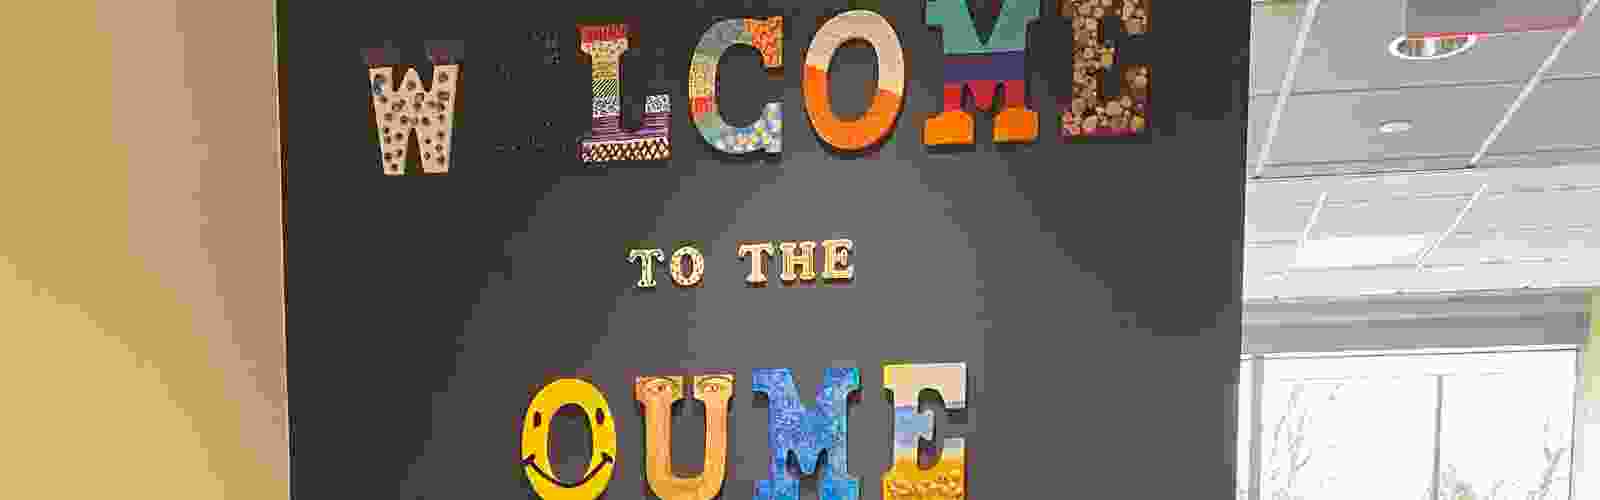 Welcome Sign - Wall